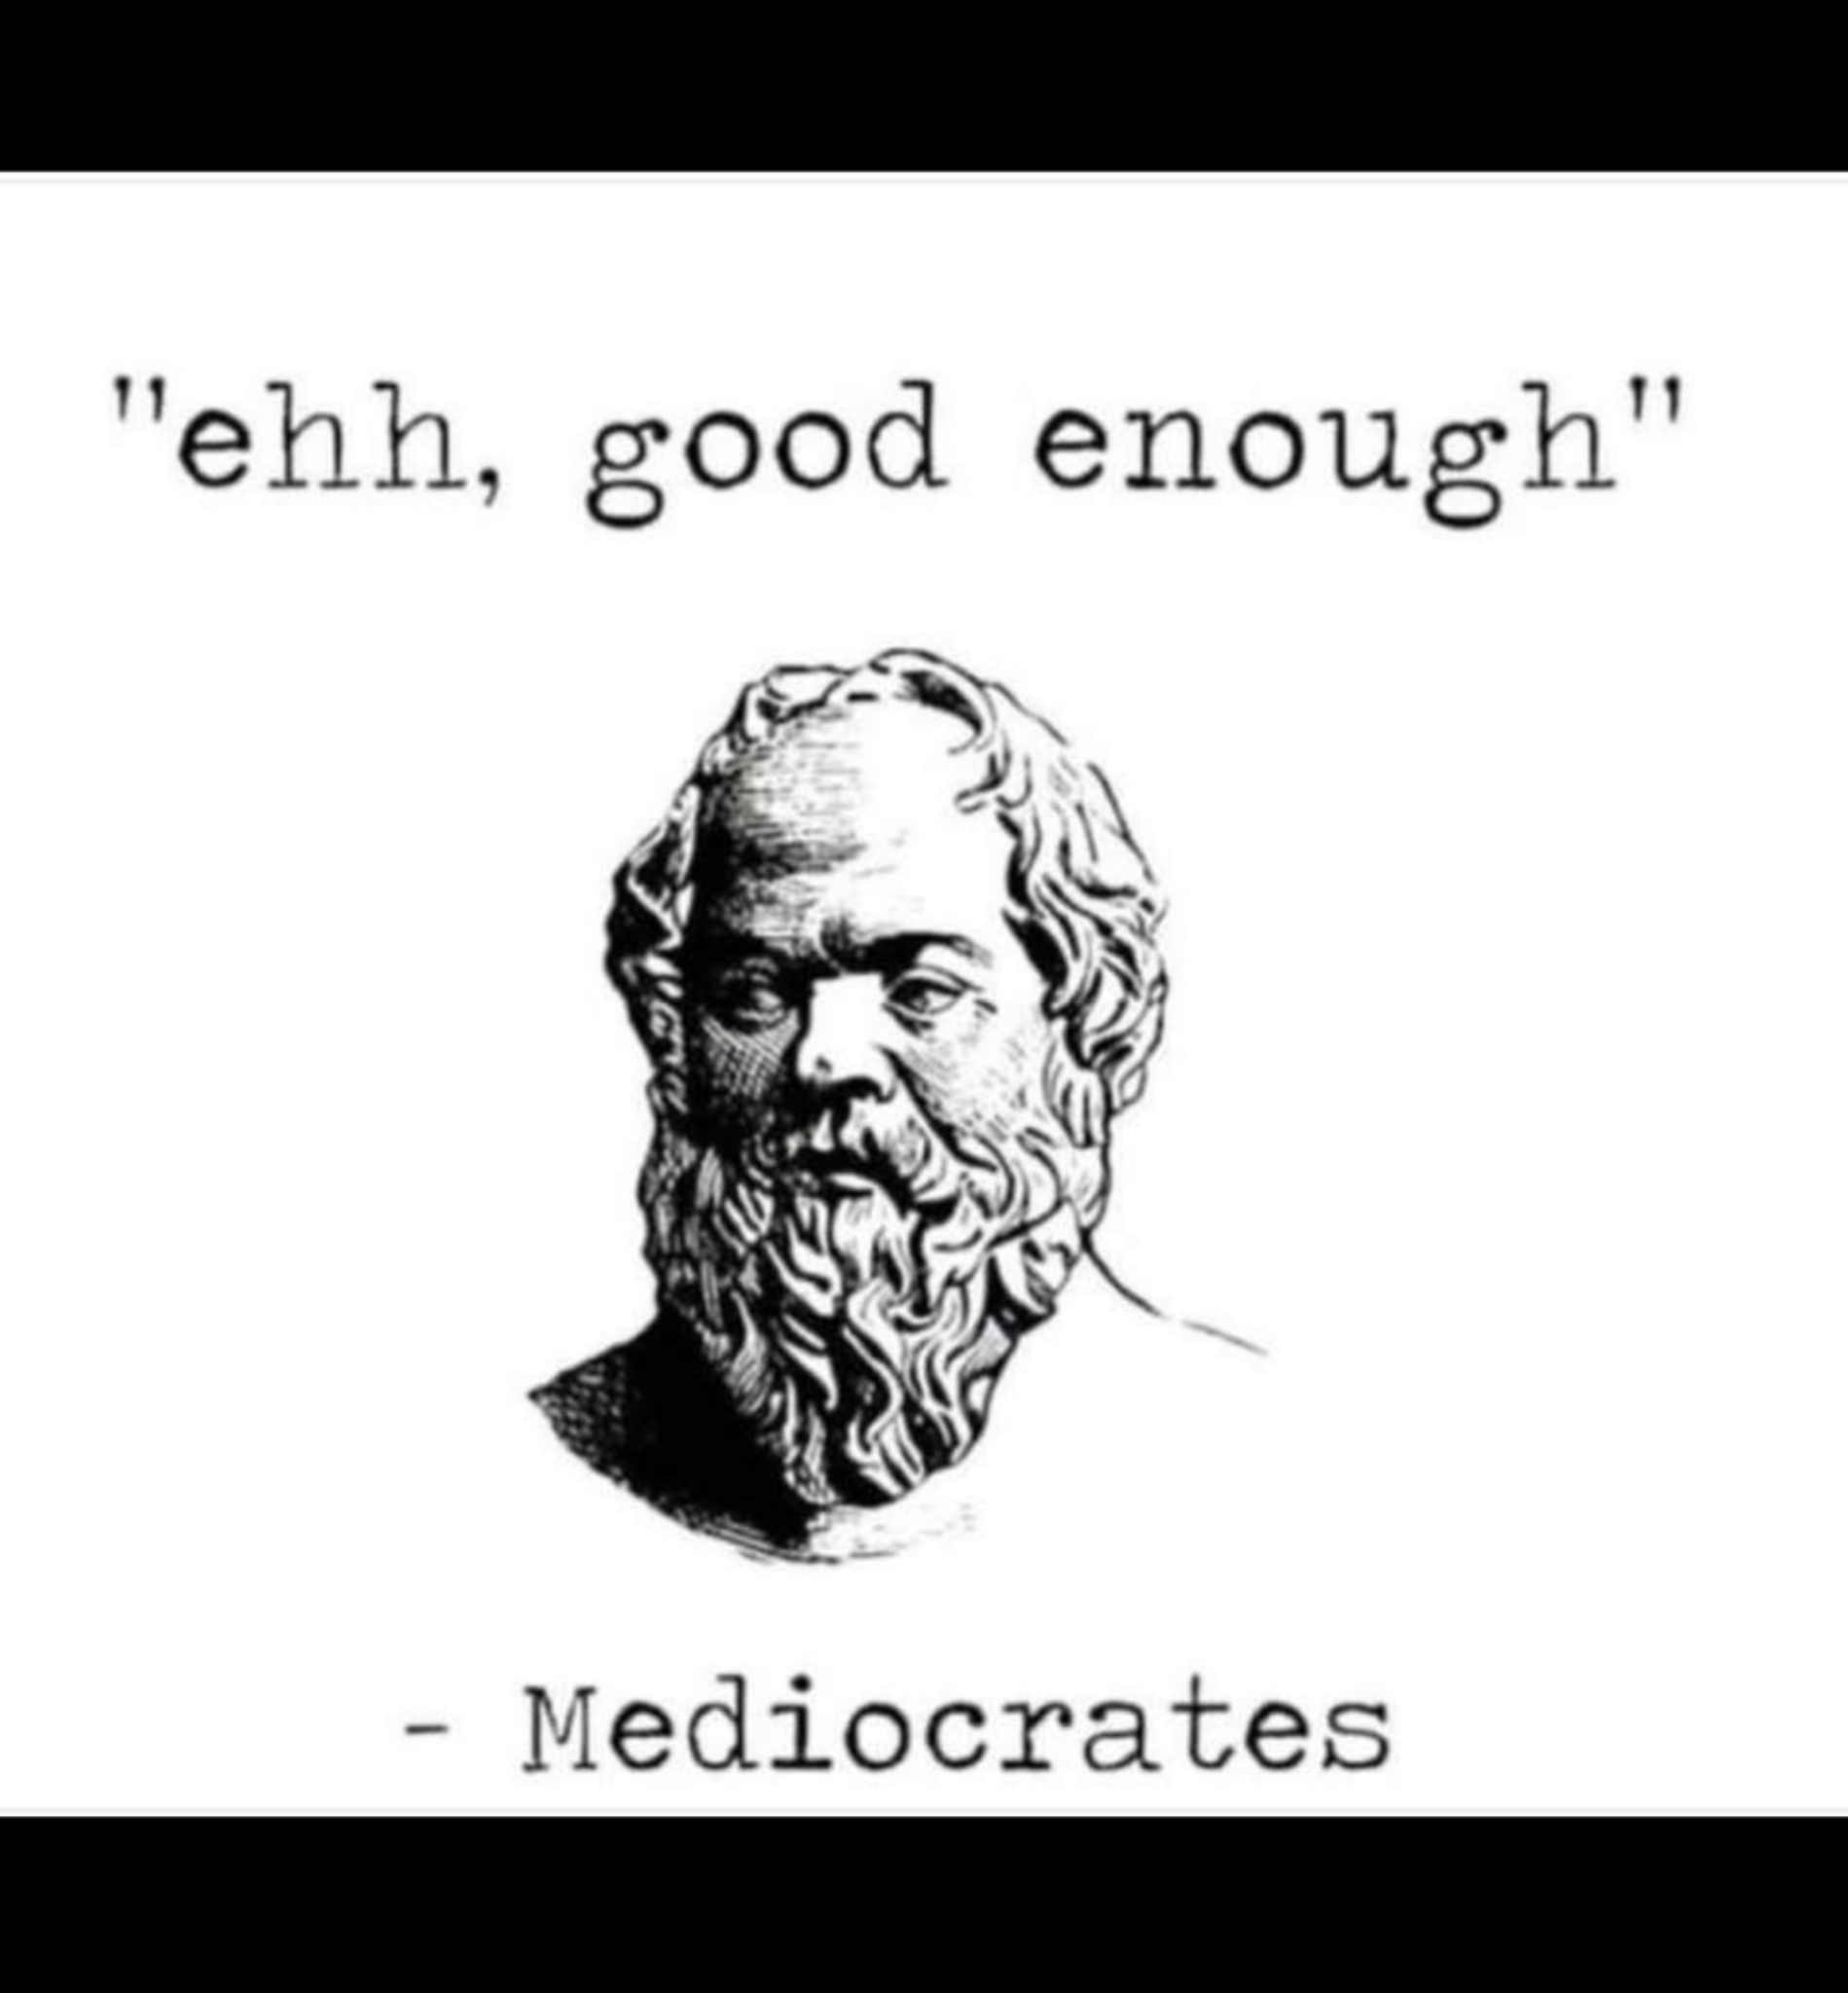 awesome pics and funny memes - greek philosopher drawing - "ehh, good enough" Mediocrates